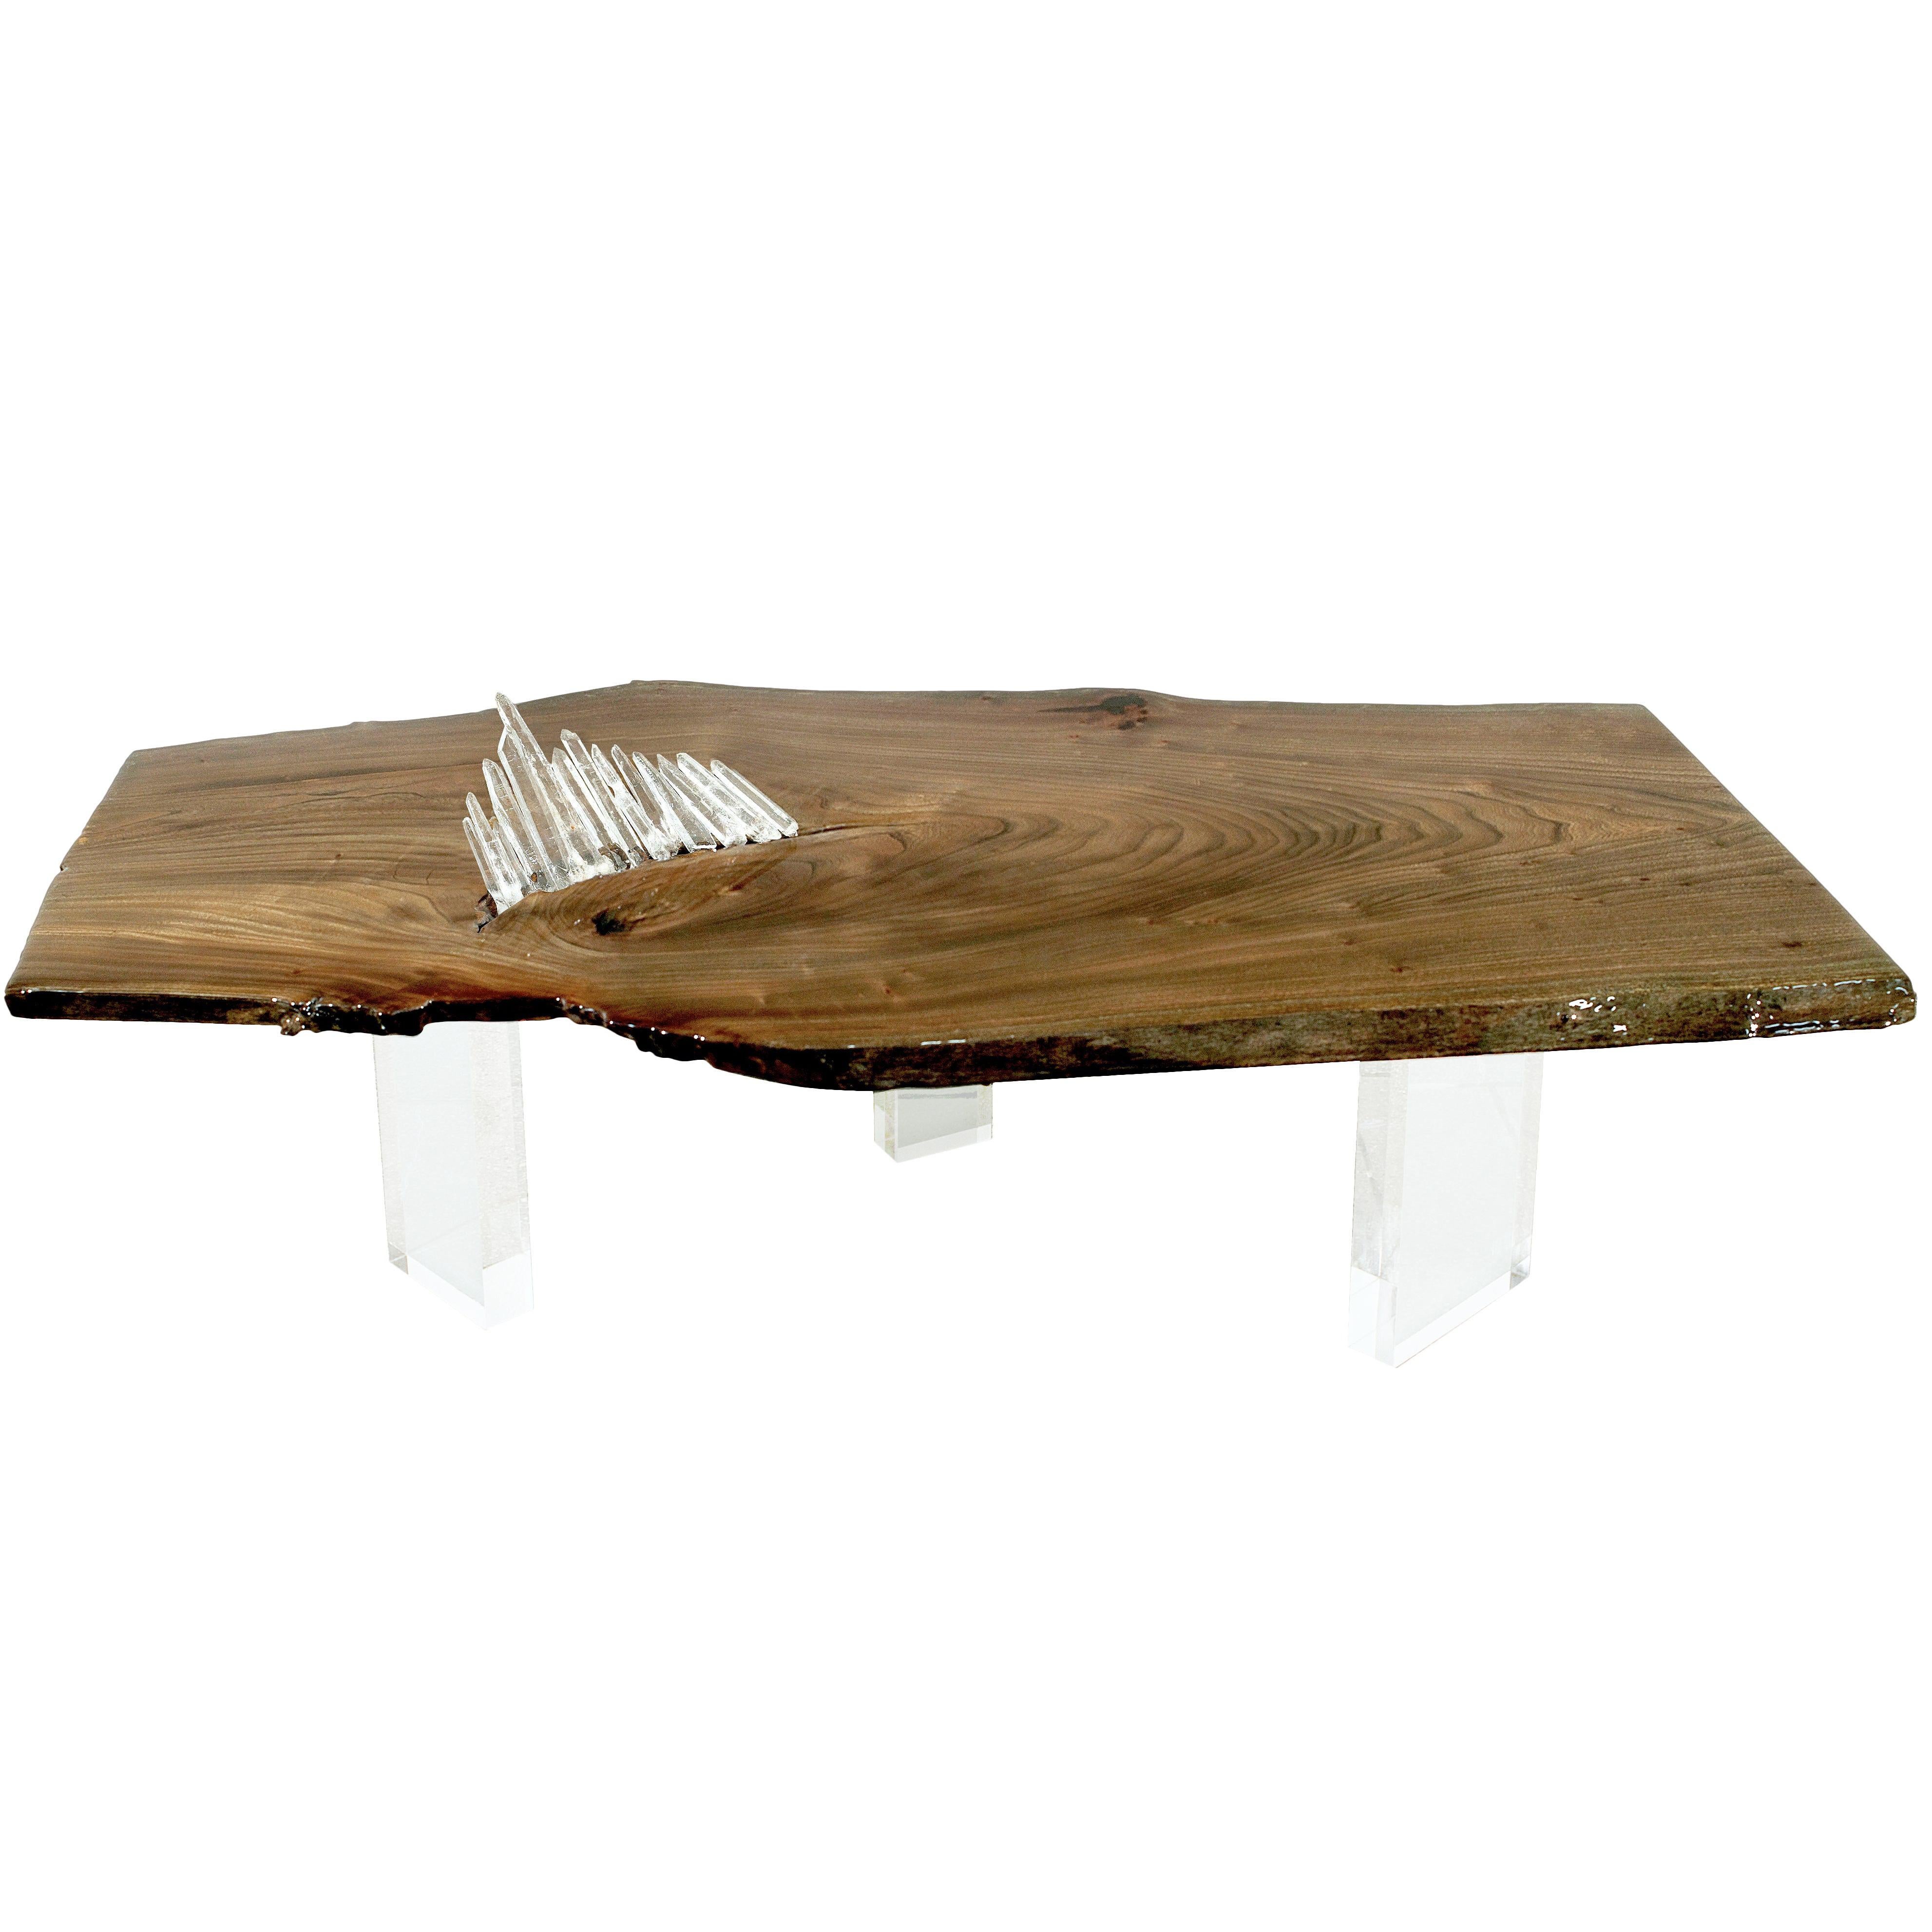 Elm wood coffee table with crystal inlay by Danna Weiss